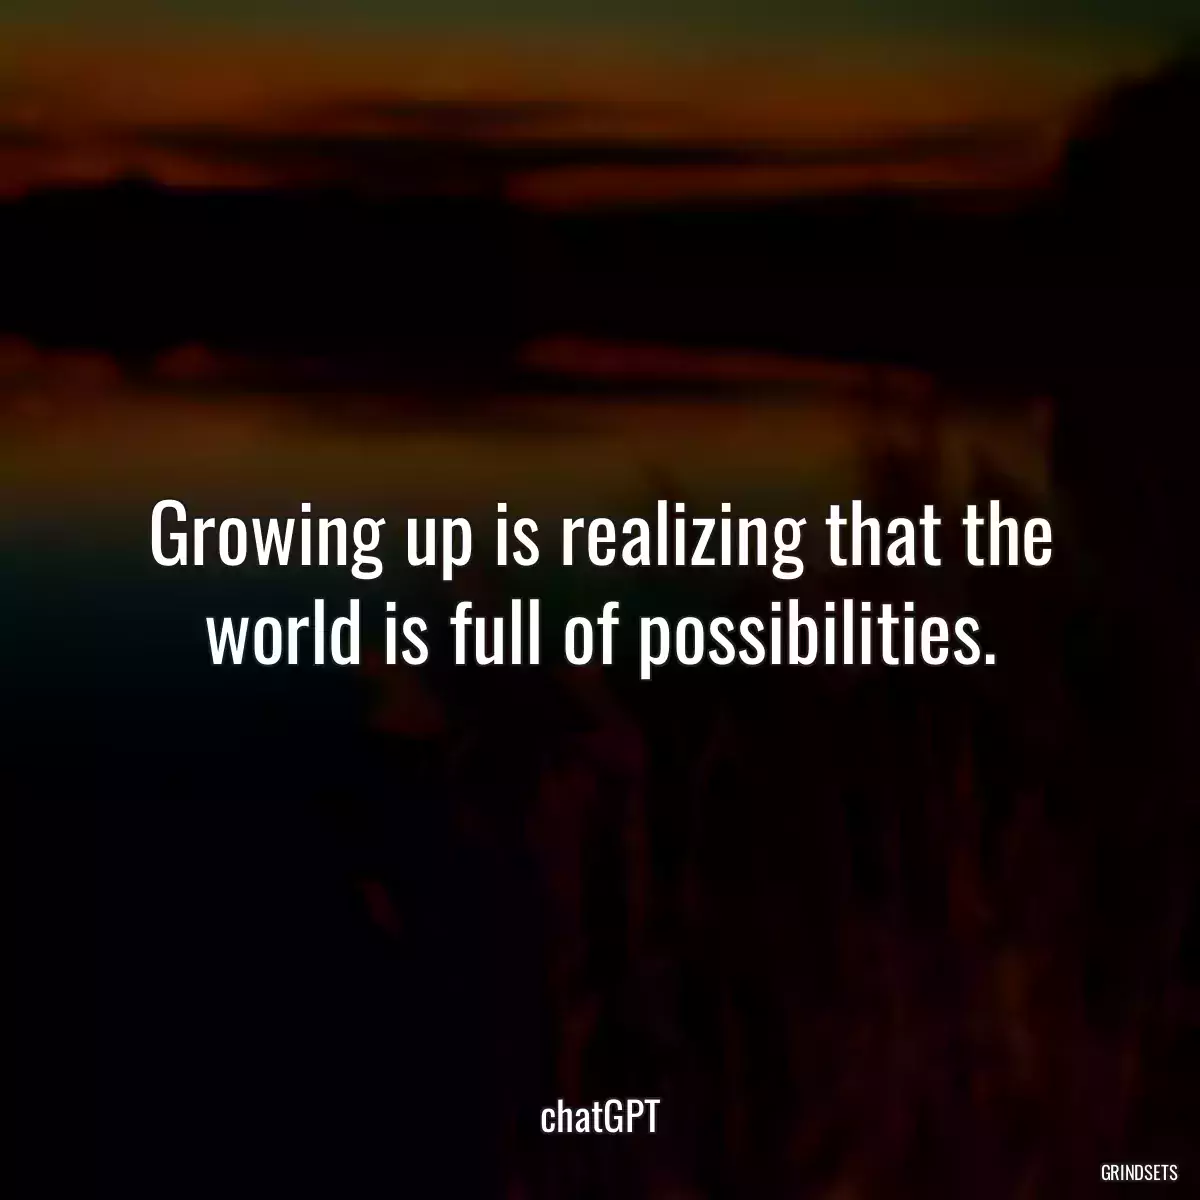 Growing up is realizing that the world is full of possibilities.